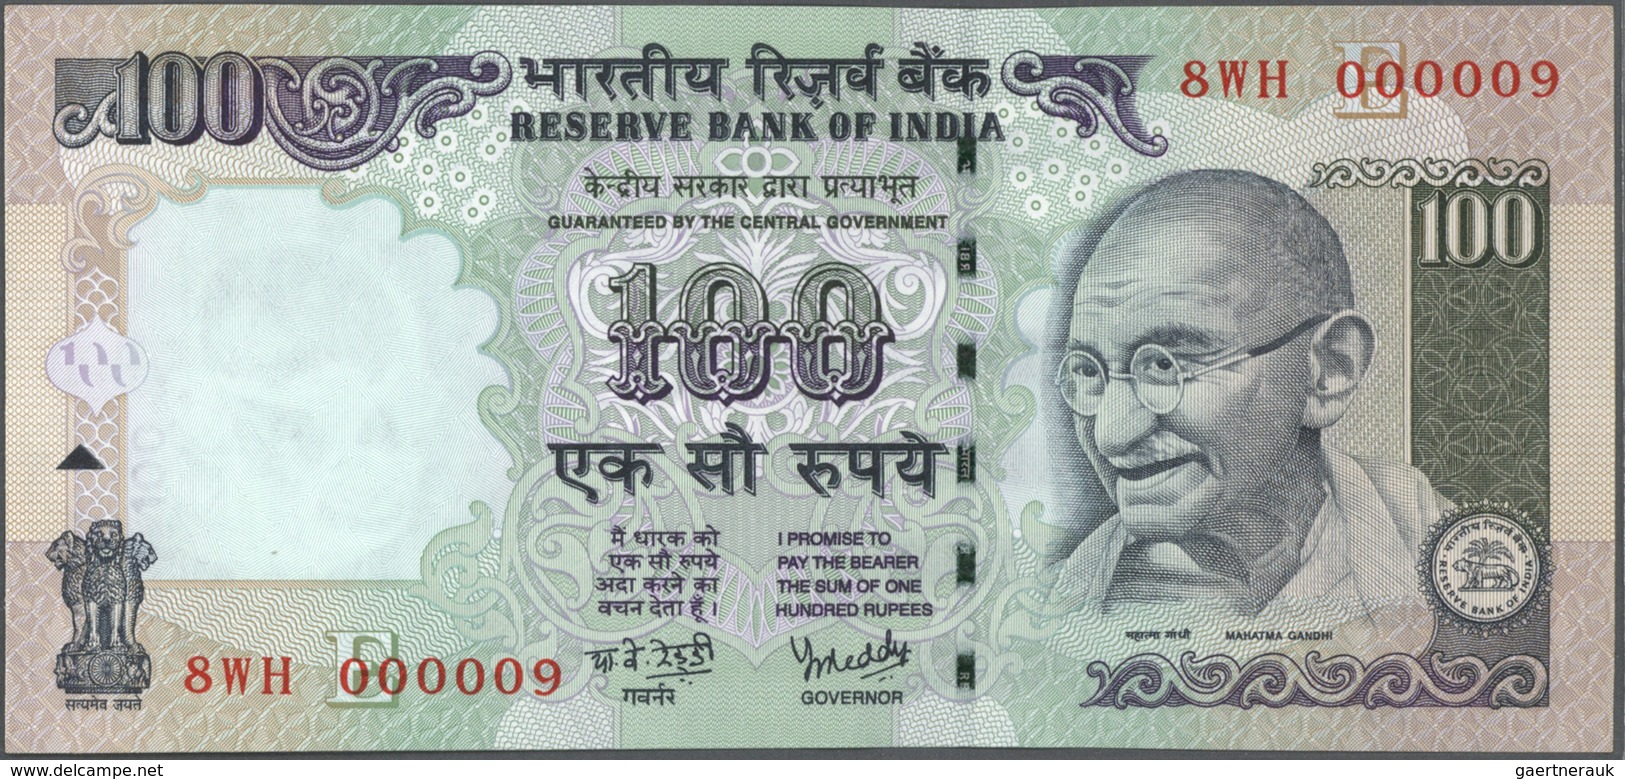 India / Indien: et of 10 notes 100 Rupees 2009 P. 98 all with interesting serial number containing a